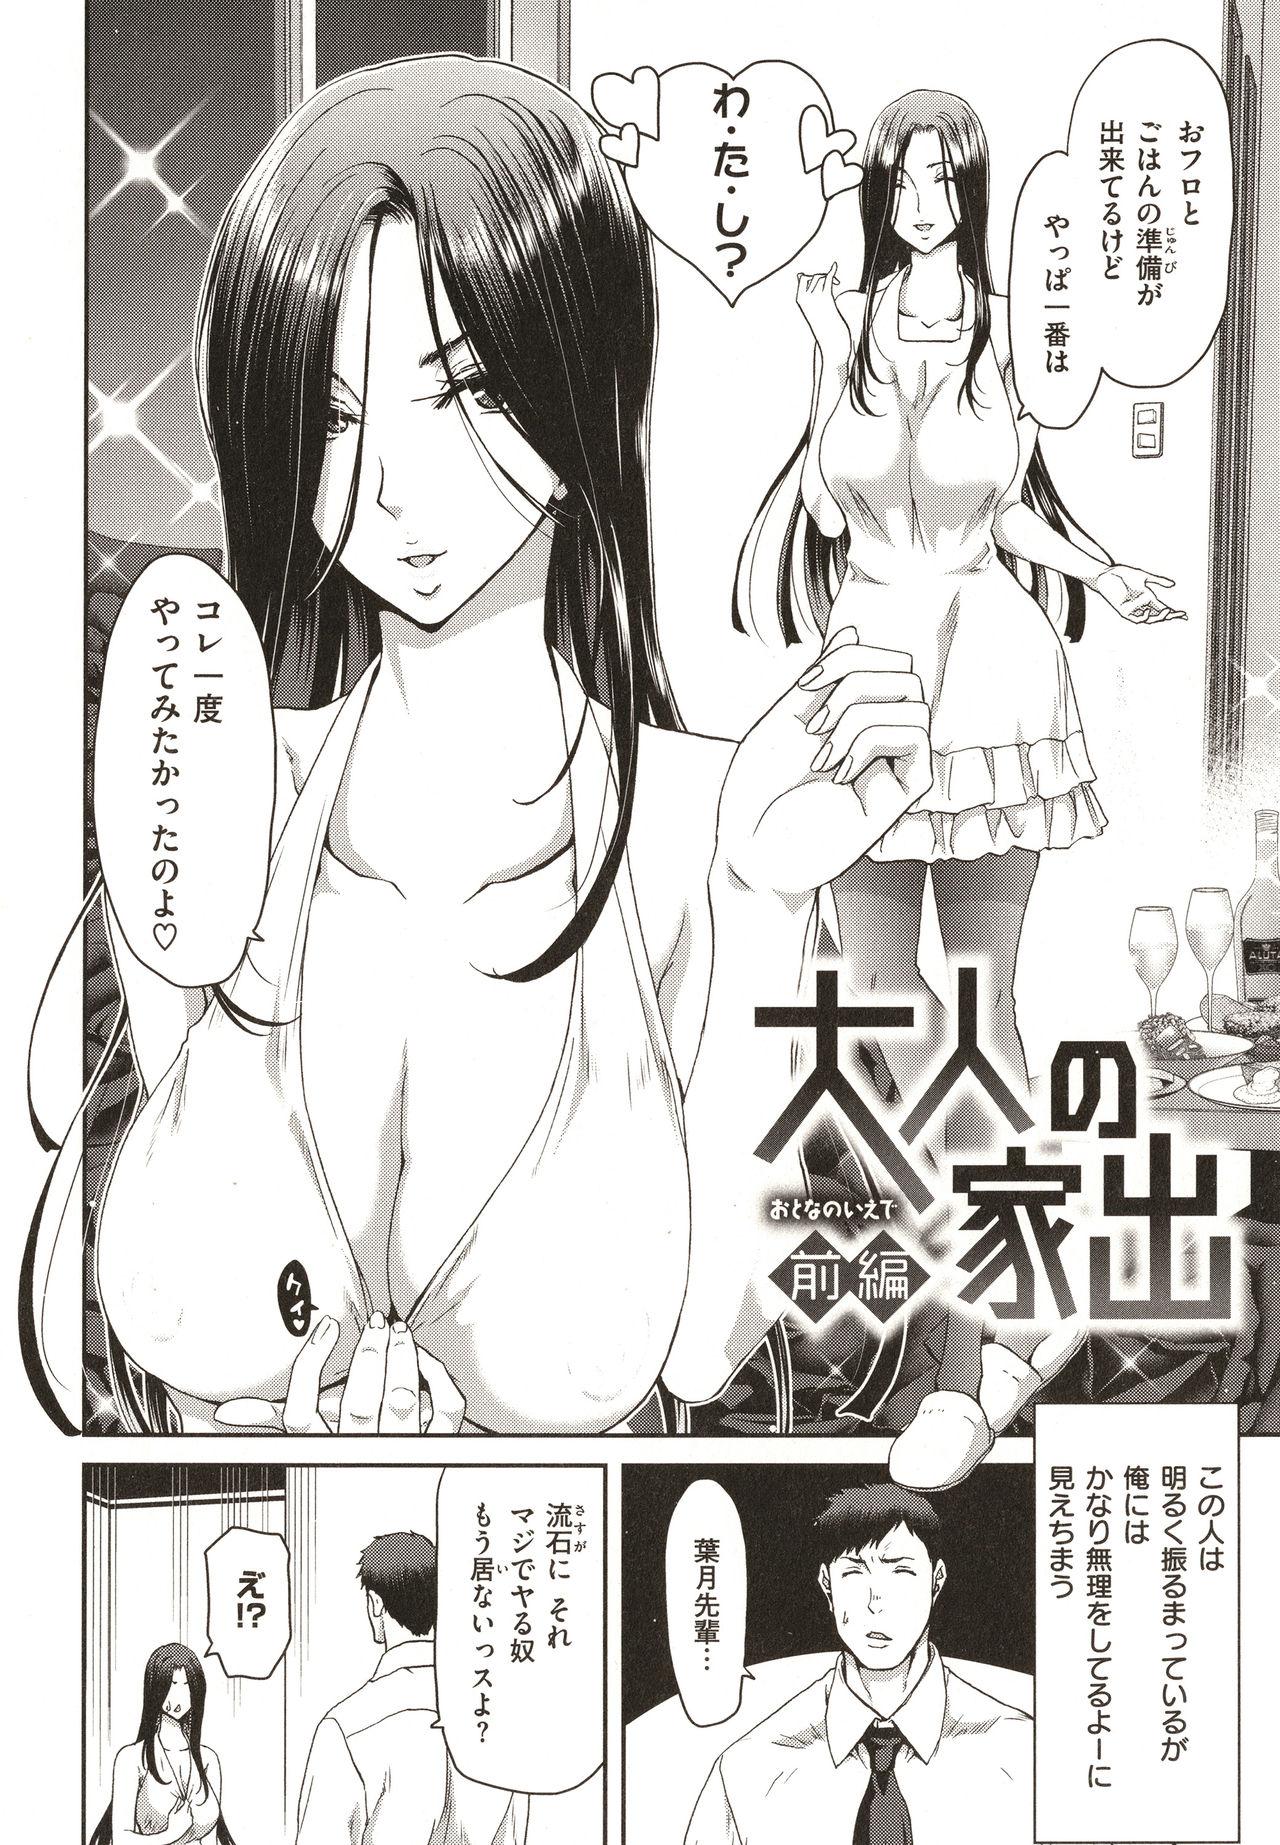 Gagging Iede Onna o Hirottara - When I picked up a runaway girl. Lesbian Sex - Page 6